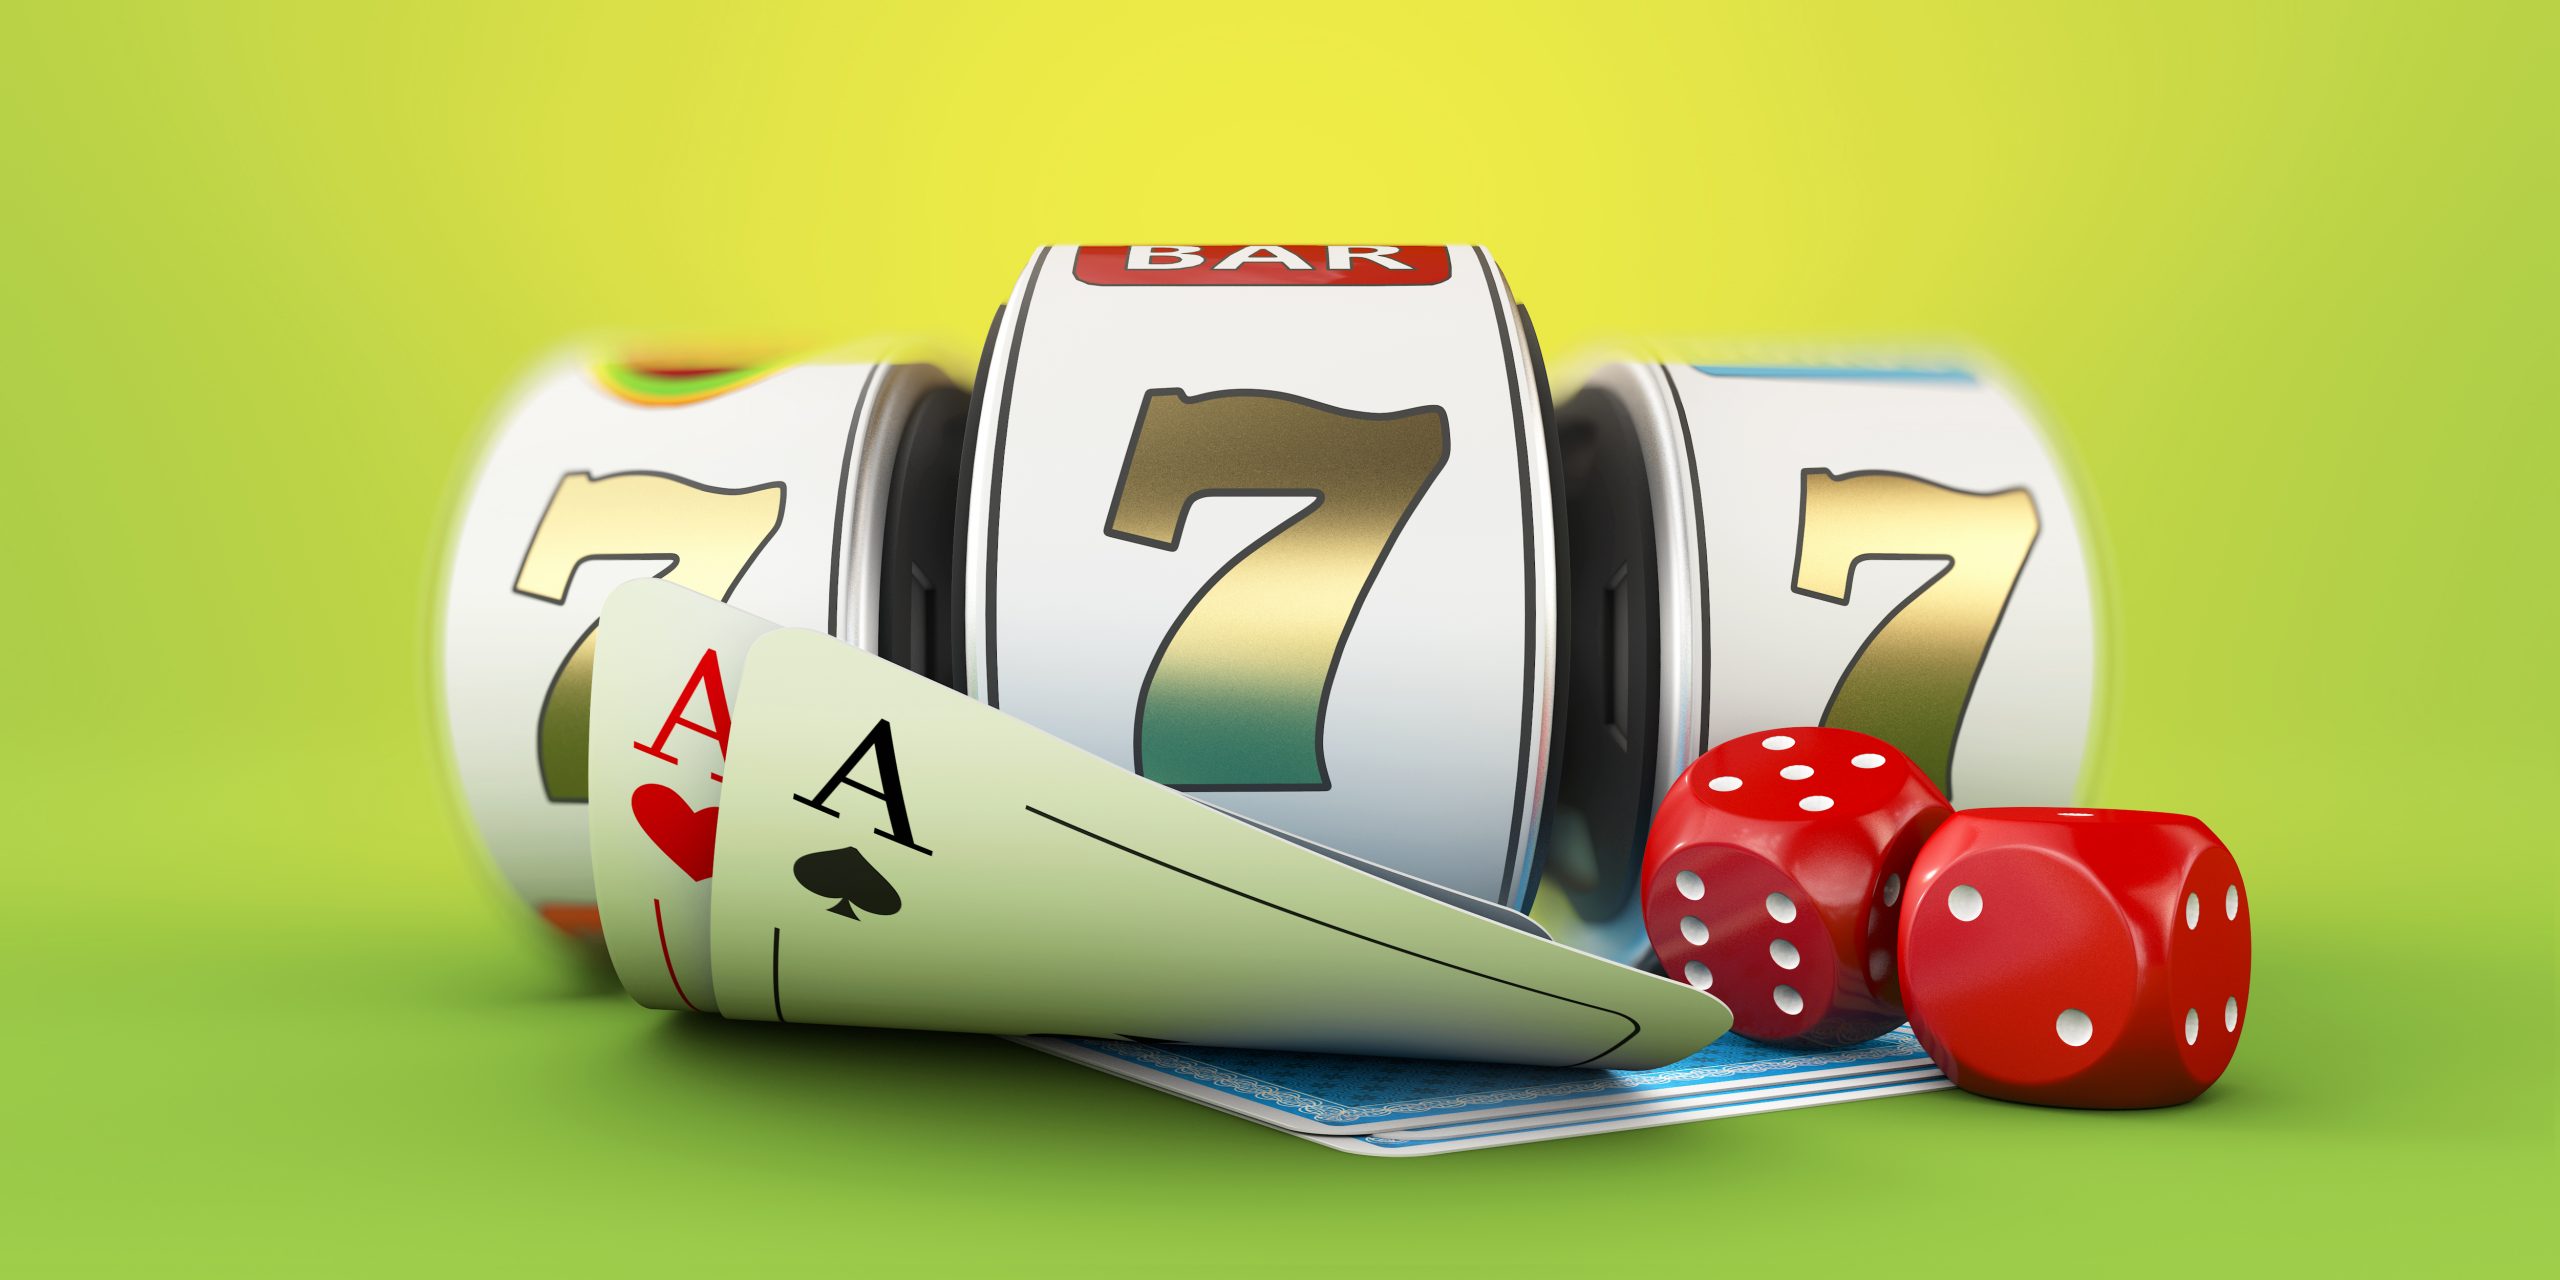 slot machine with lucky sevens jackpot dace clipping path included 3d rendering scaled Almanbahis Canlı Bahis